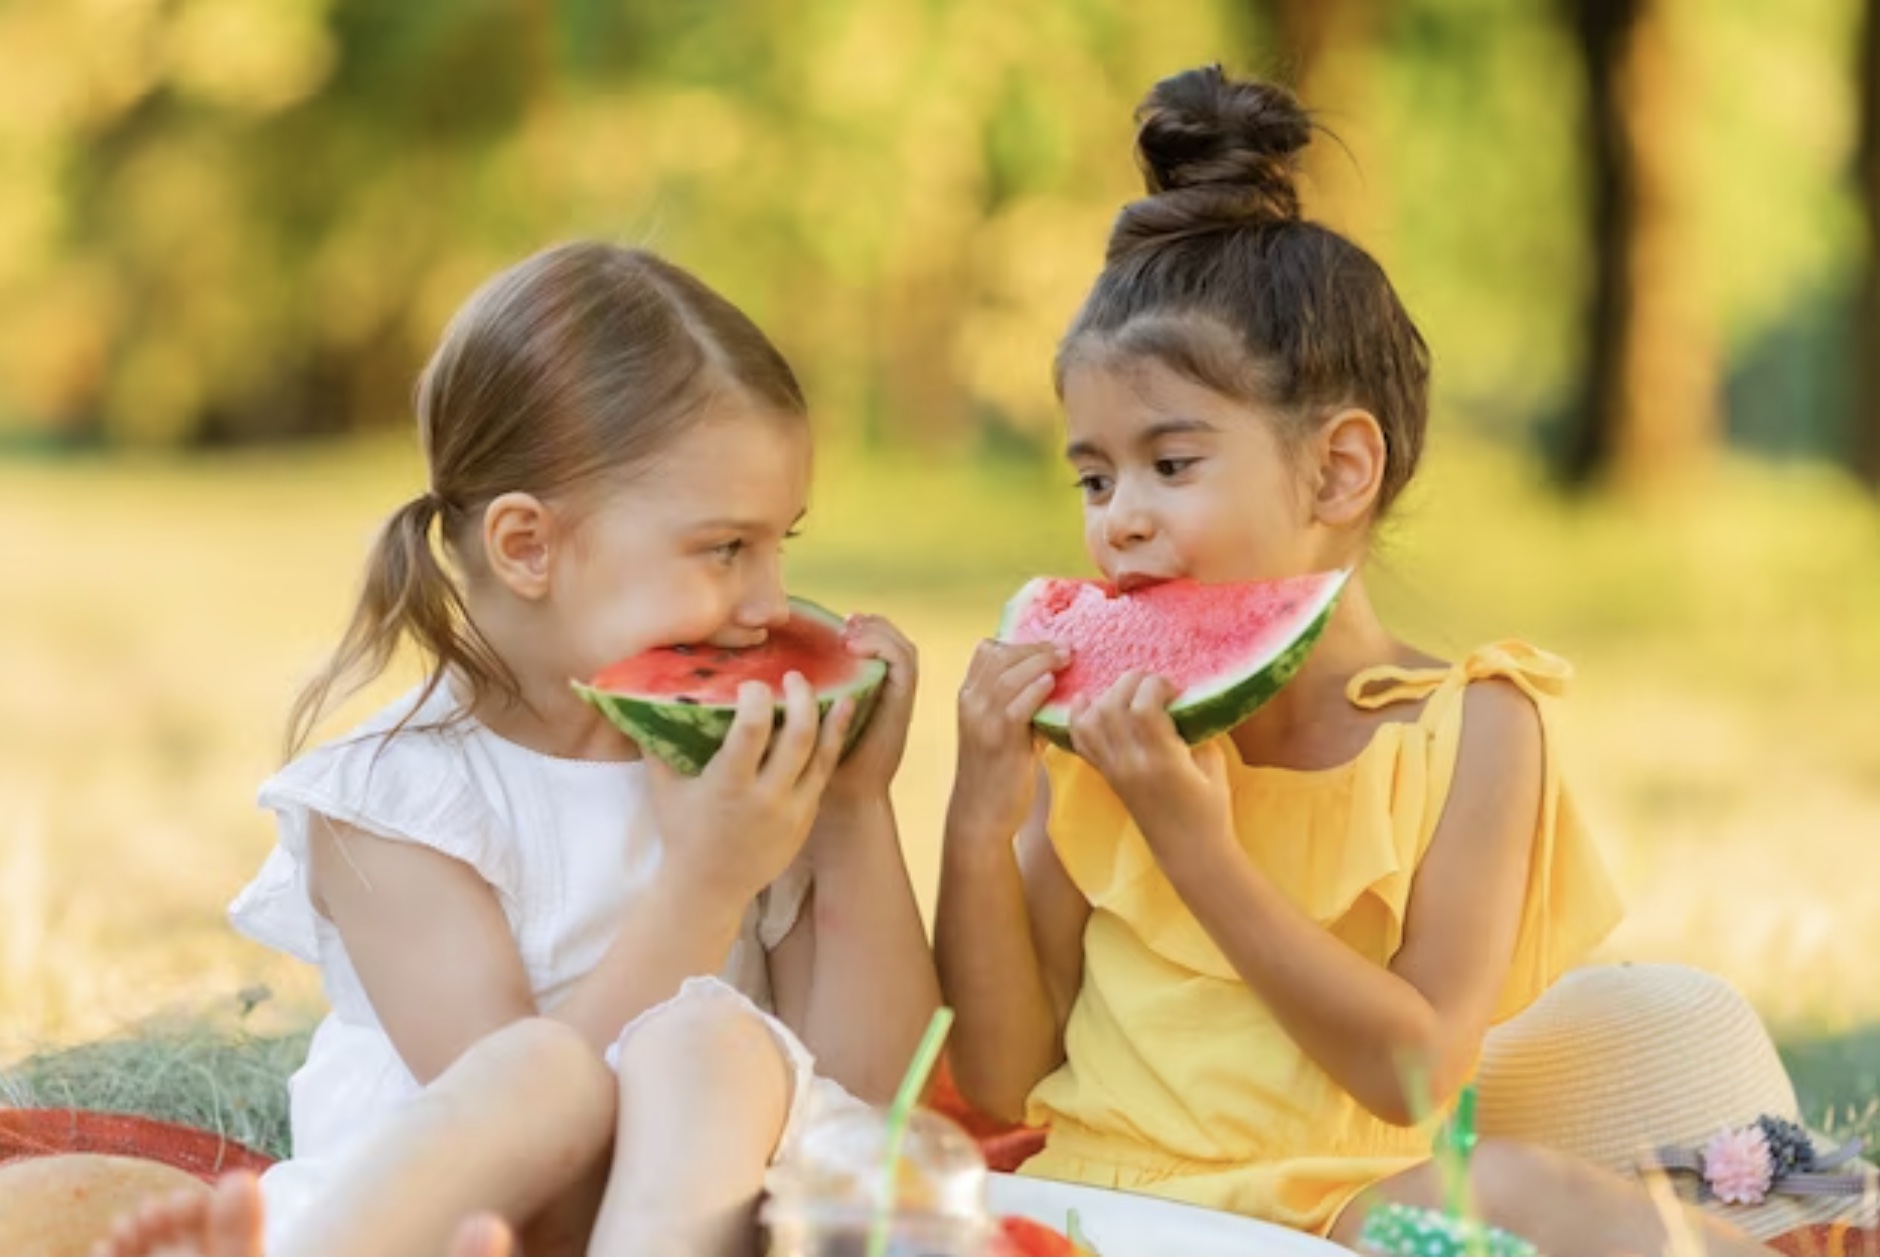 Two children eating watermelon in park